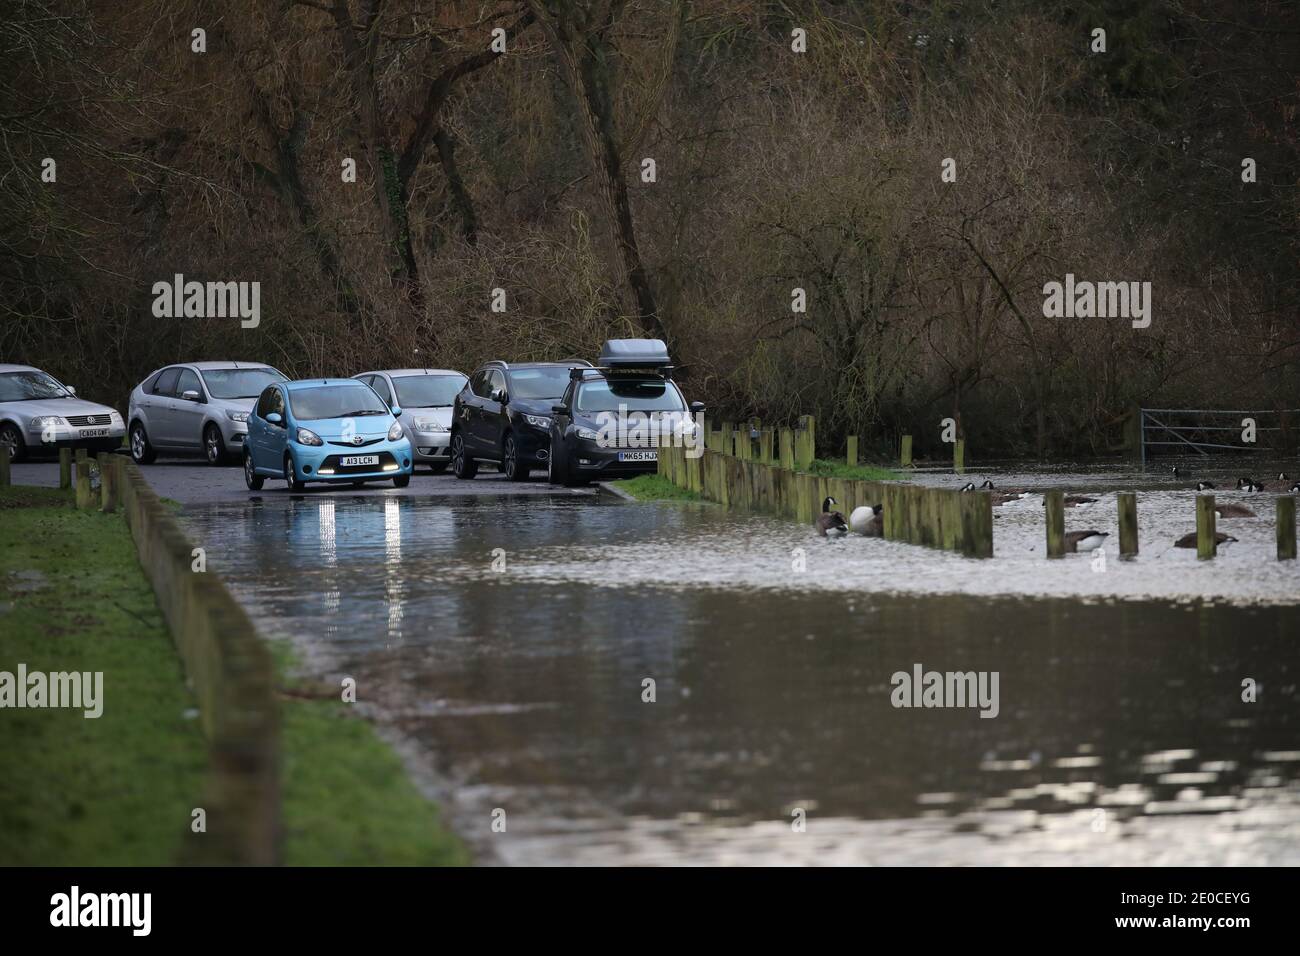 Peterborough, UK. 27th Dec, 2020. Cars find this road impassable as floodwater has swamped it near Peterborough, Cambridgeshire. Credit: Paul Marriott/Alamy Live News Stock Photo